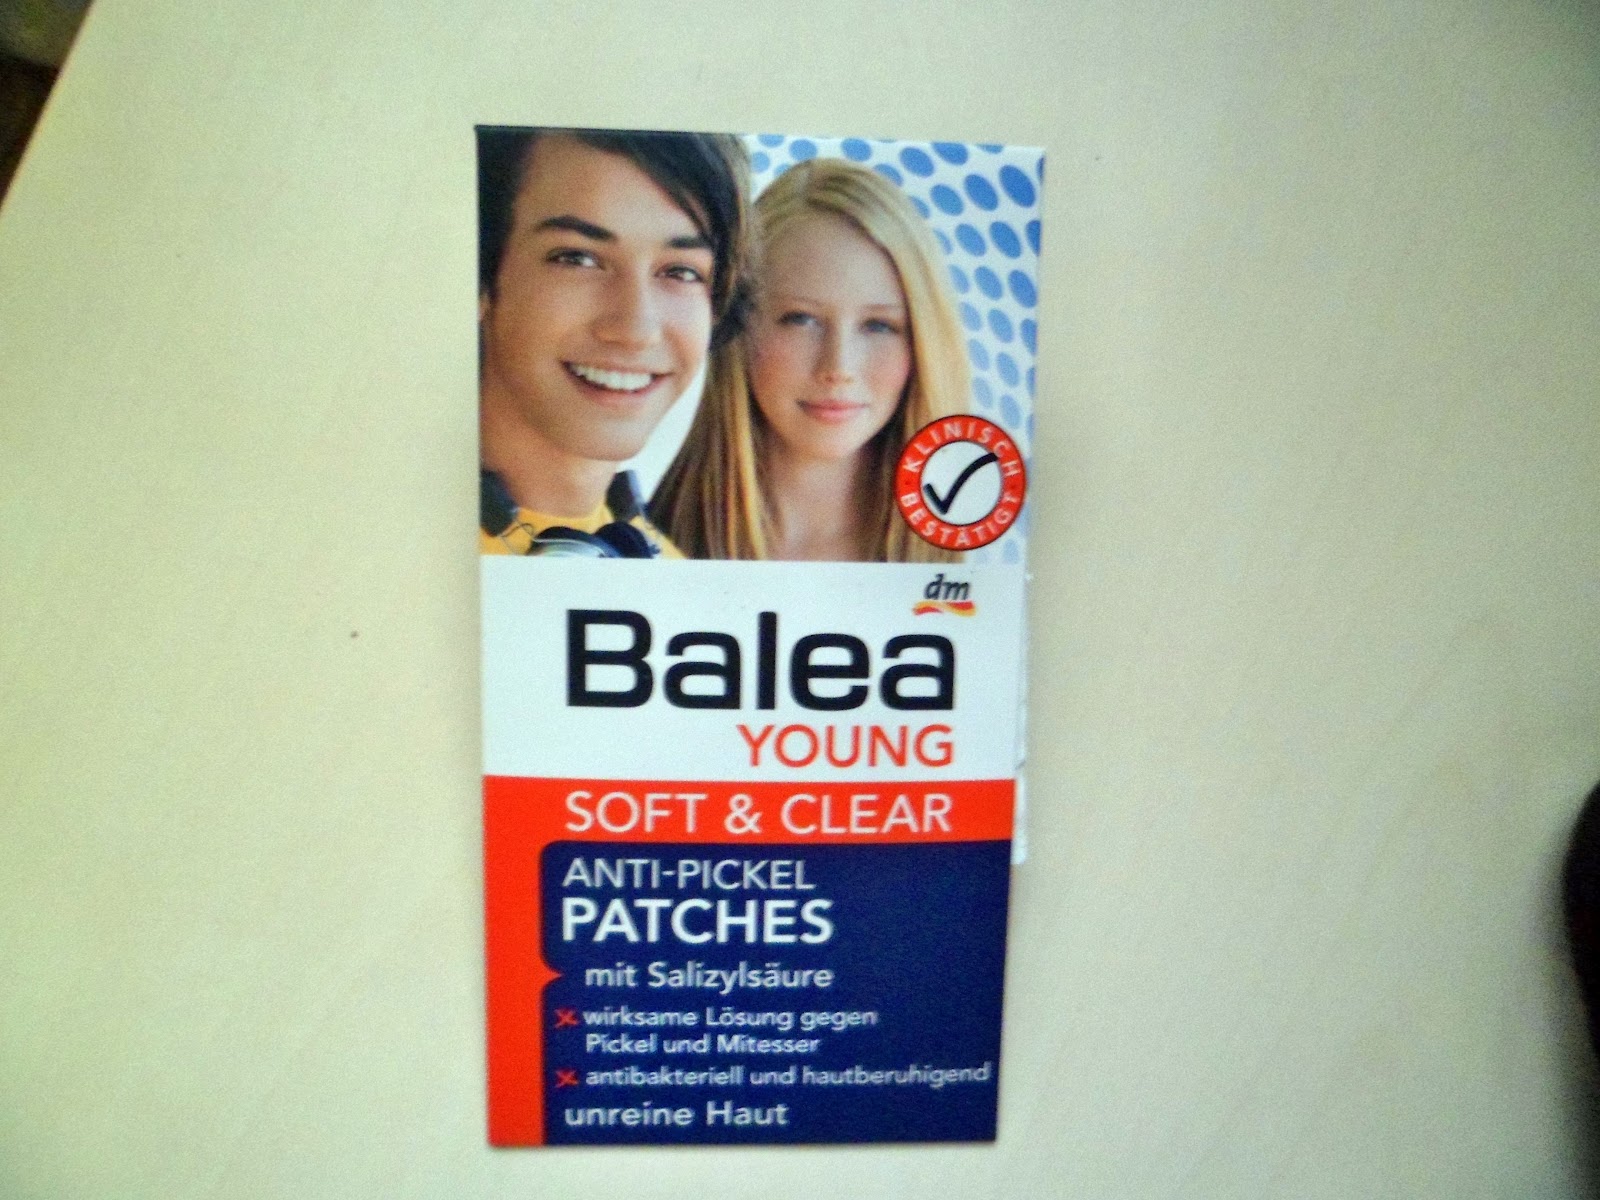 Confessions Of A Student Review Balea Young Soft Clear Anti Pickel Patches